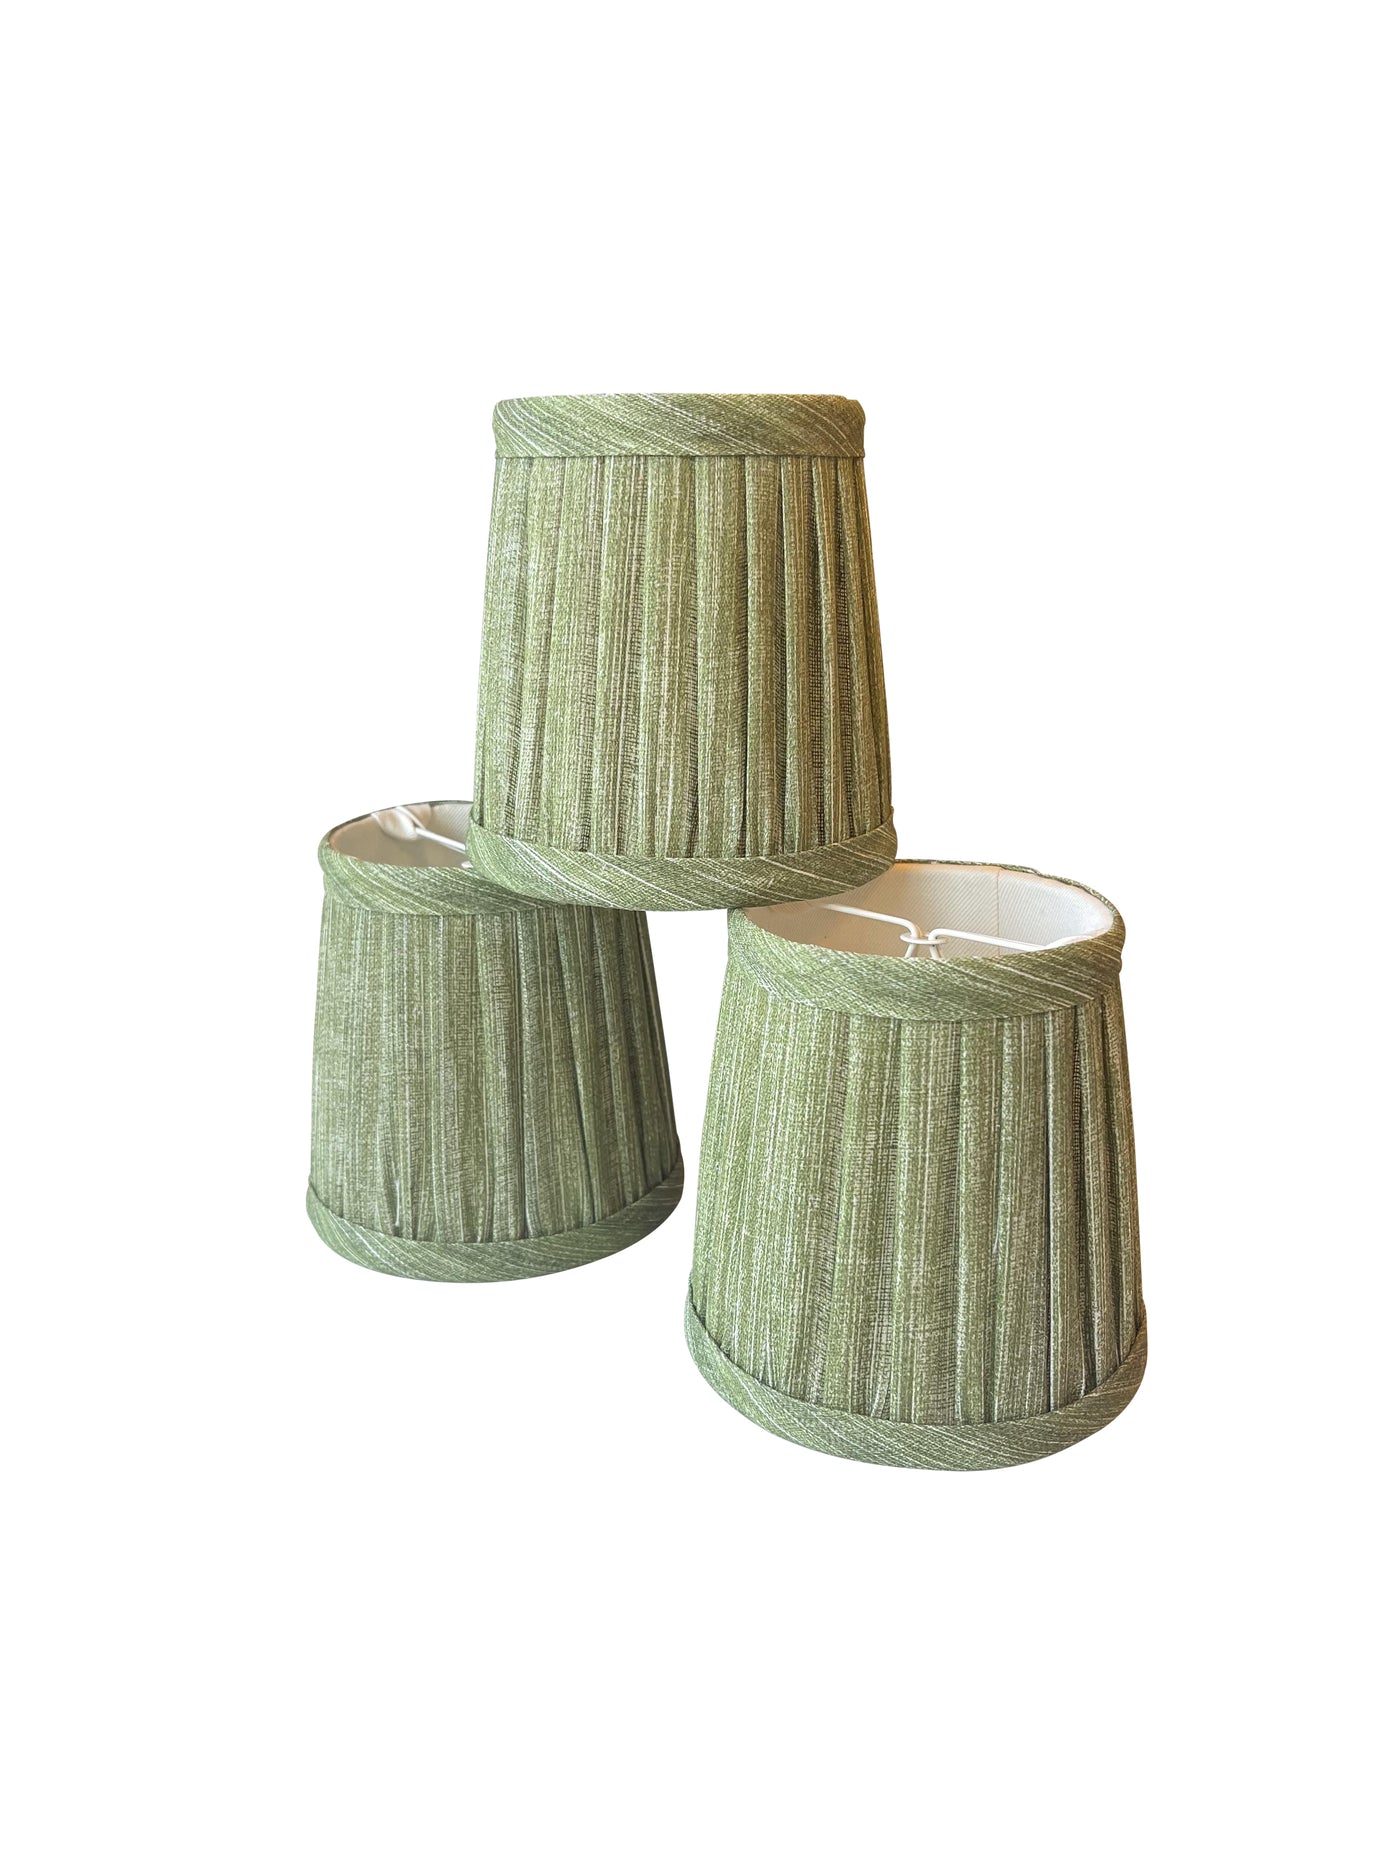 4.5" Fermoie Lampshade - Plain Linen in Kintyre Green  | Newport Lamp And Shade | Located in Newport, RI